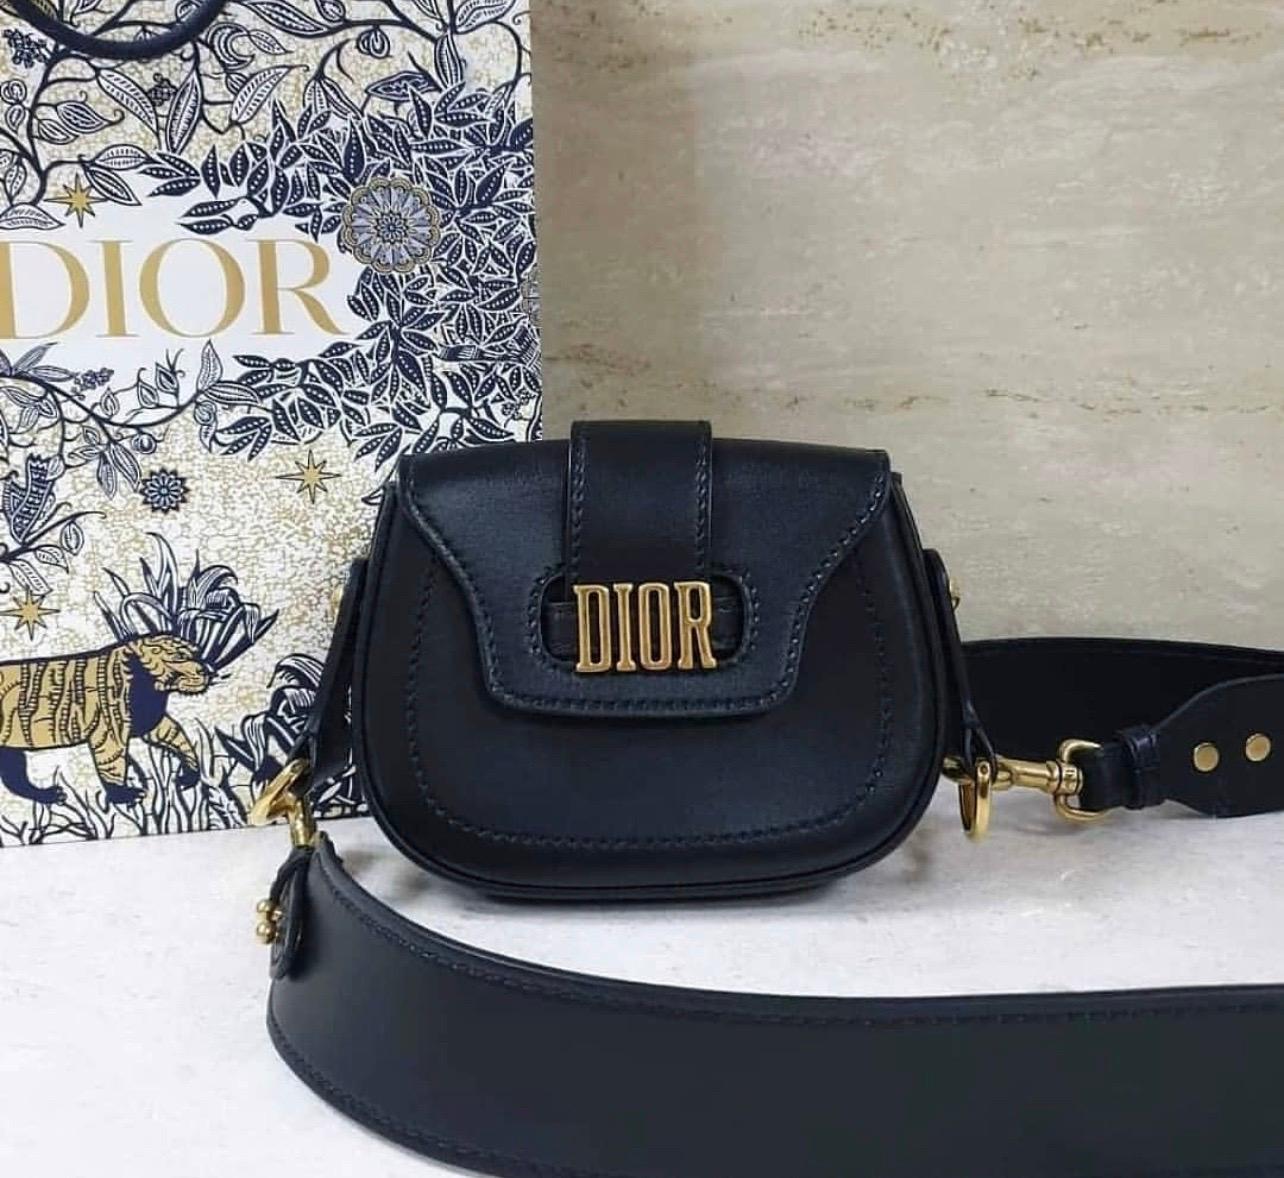 Dior released its new smoking hot bags for the Summer 2017 Collection. Hot off the press, this is the Dior D-Fence Bag, made to flaunt, looks like it can conquer the fashion world,

Sporting a casual sporty elegance, this Dior D-Fence Bag is